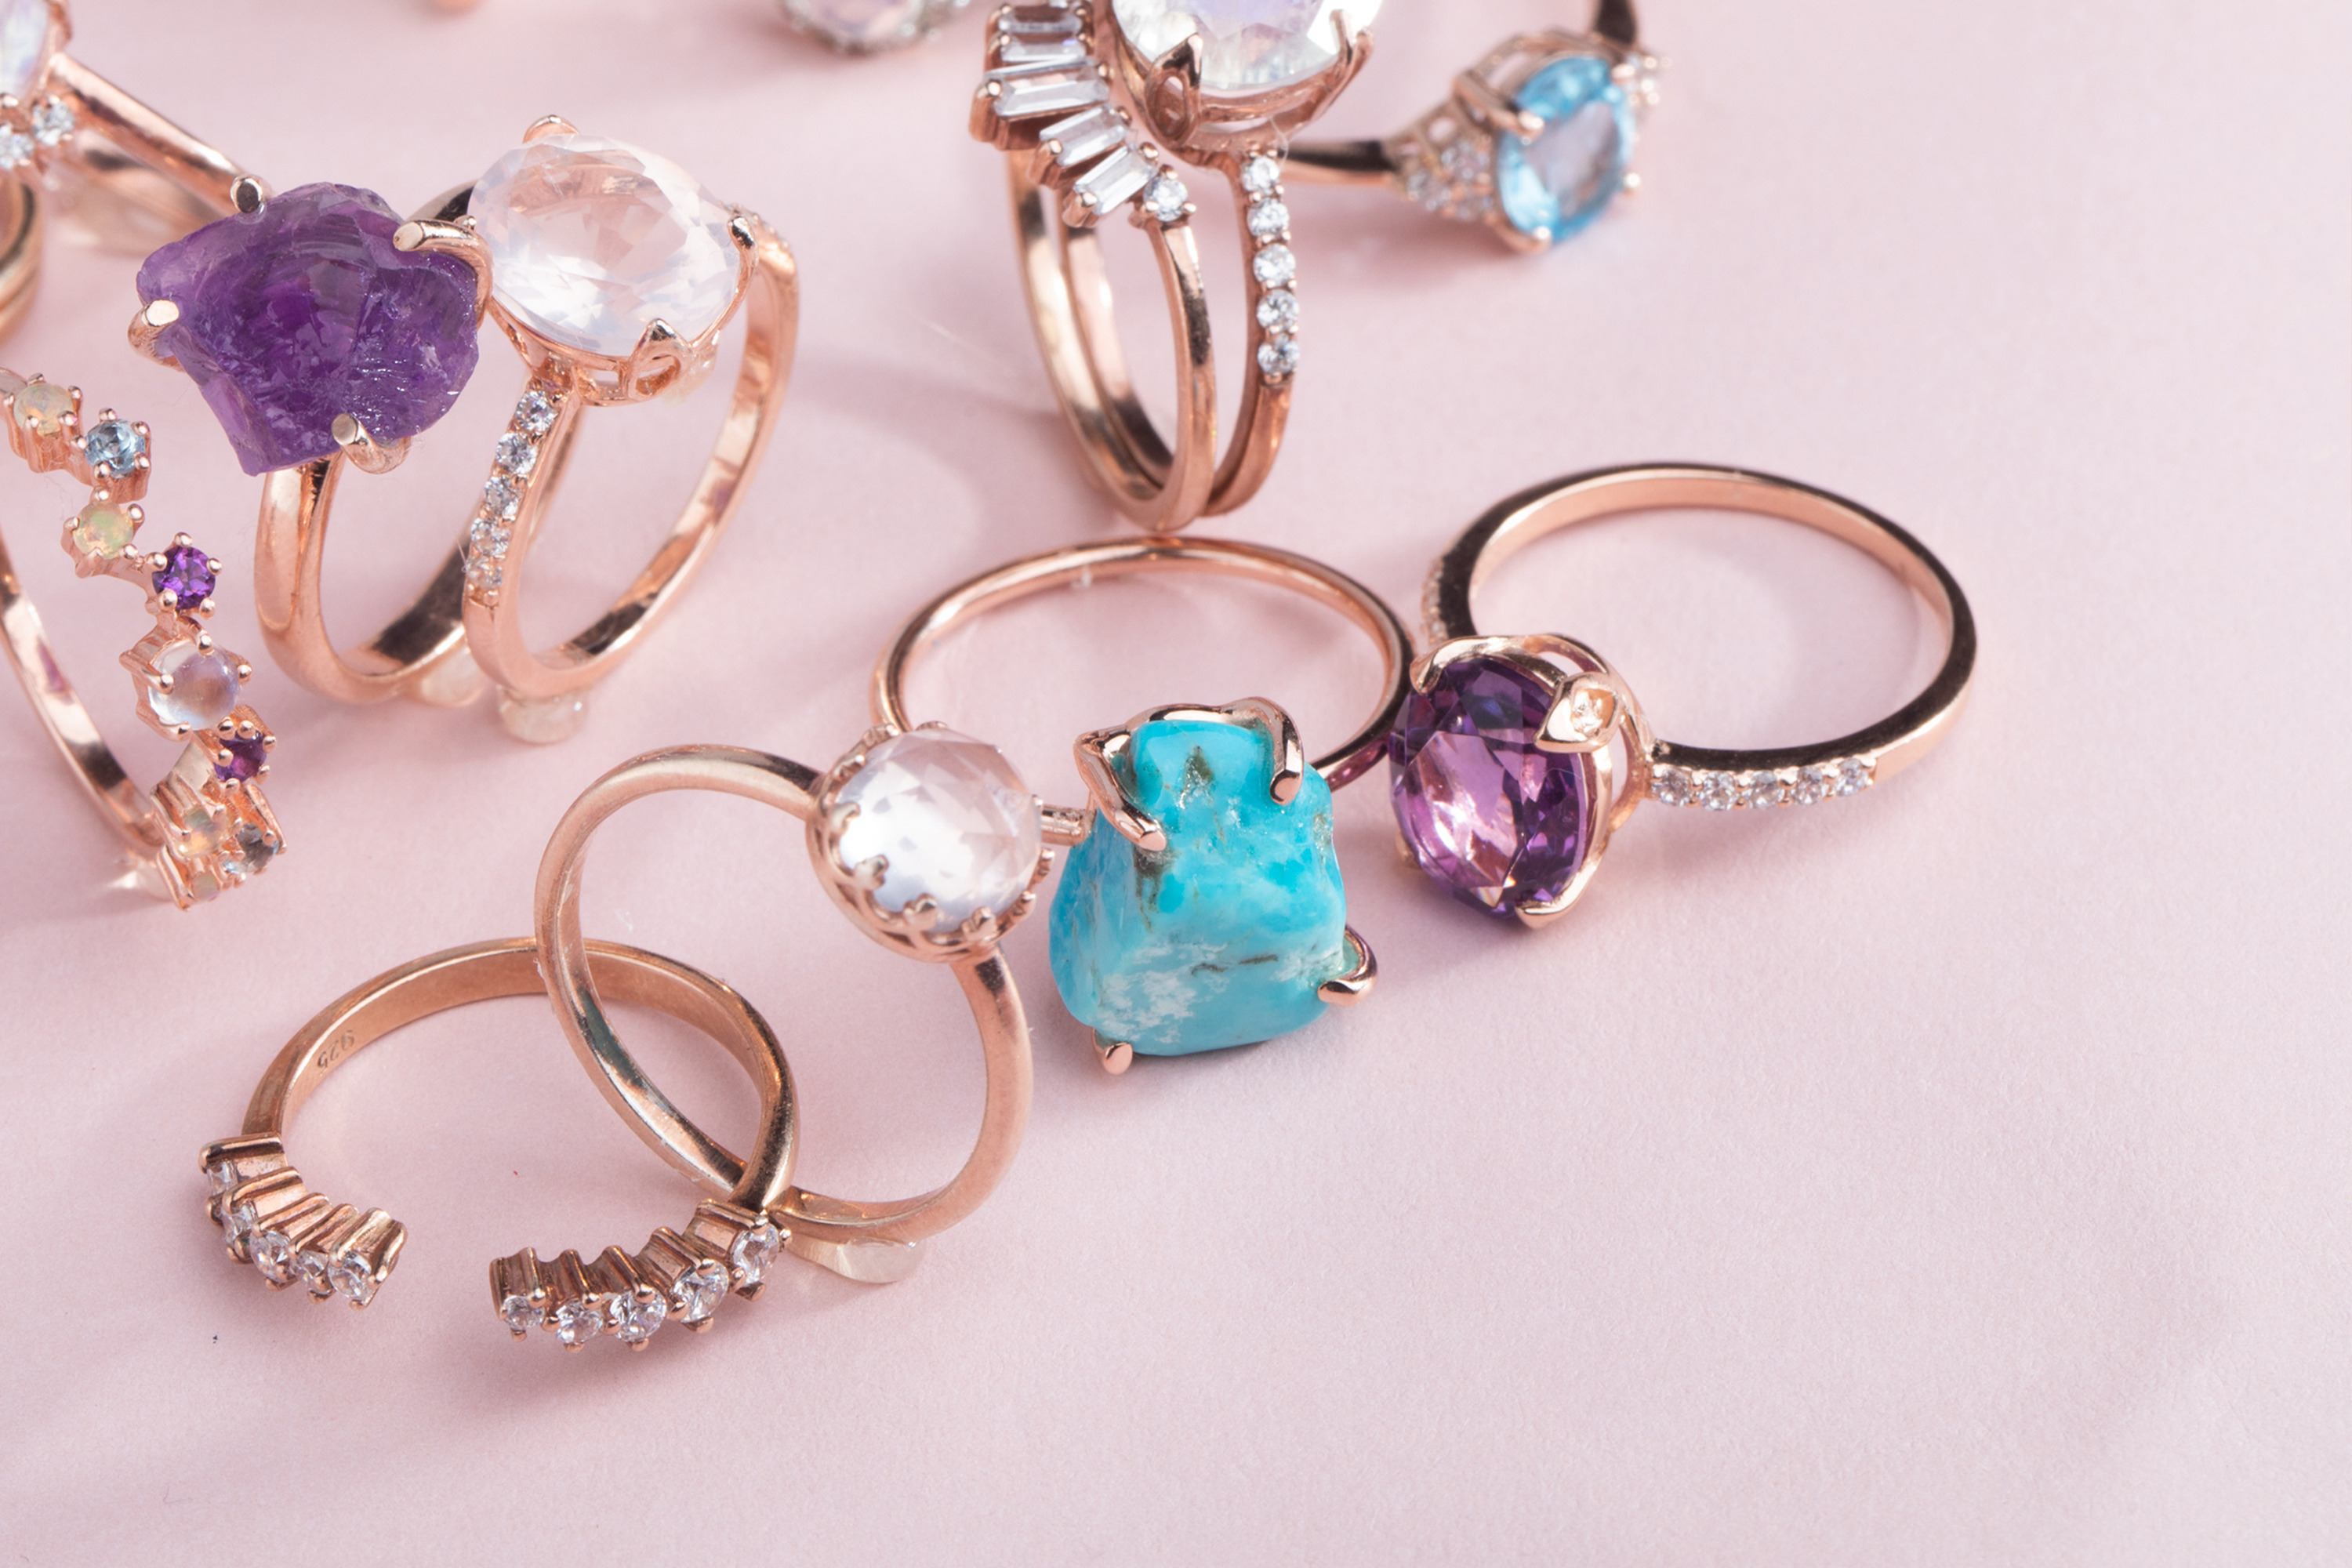 A selection of different gemstone rings.